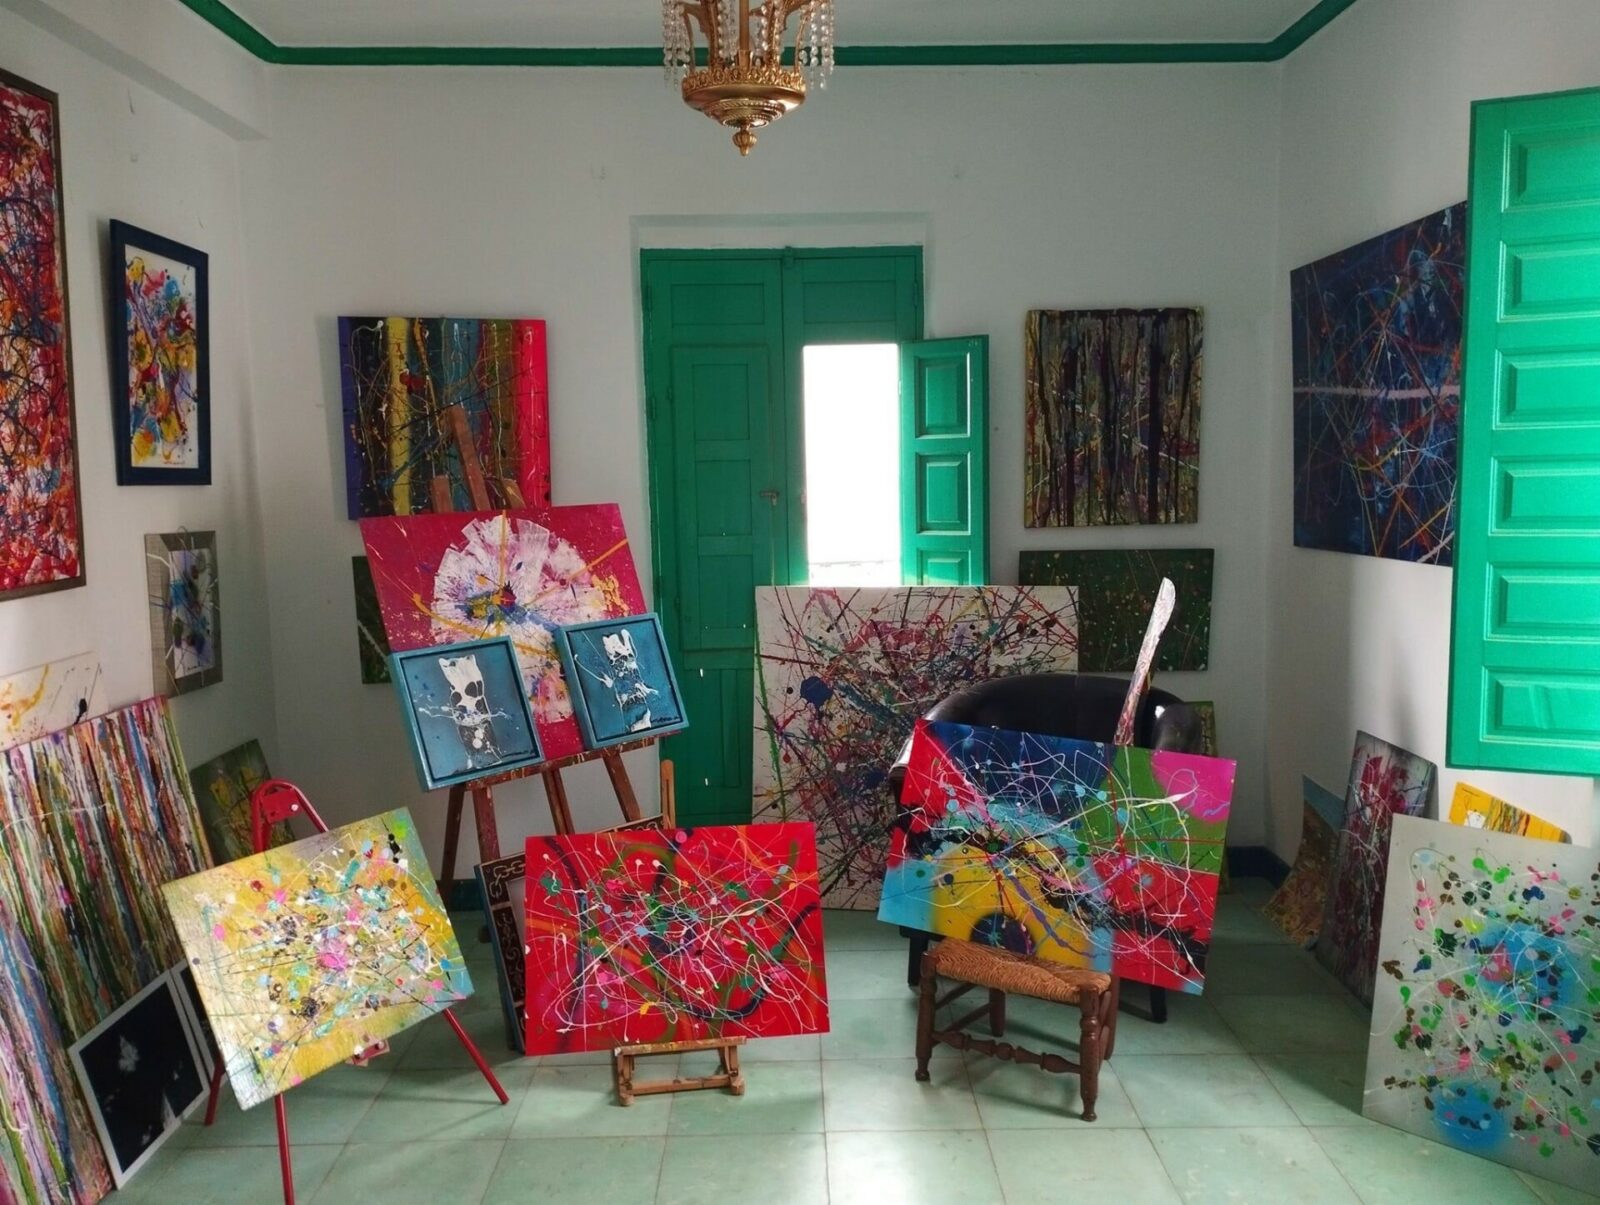 Image is of the work of Gerardo Garcia Avíla, an artist based in Cómpeta. The photo shows his own work on exhibit in his gallery off of Plaza Almijara.